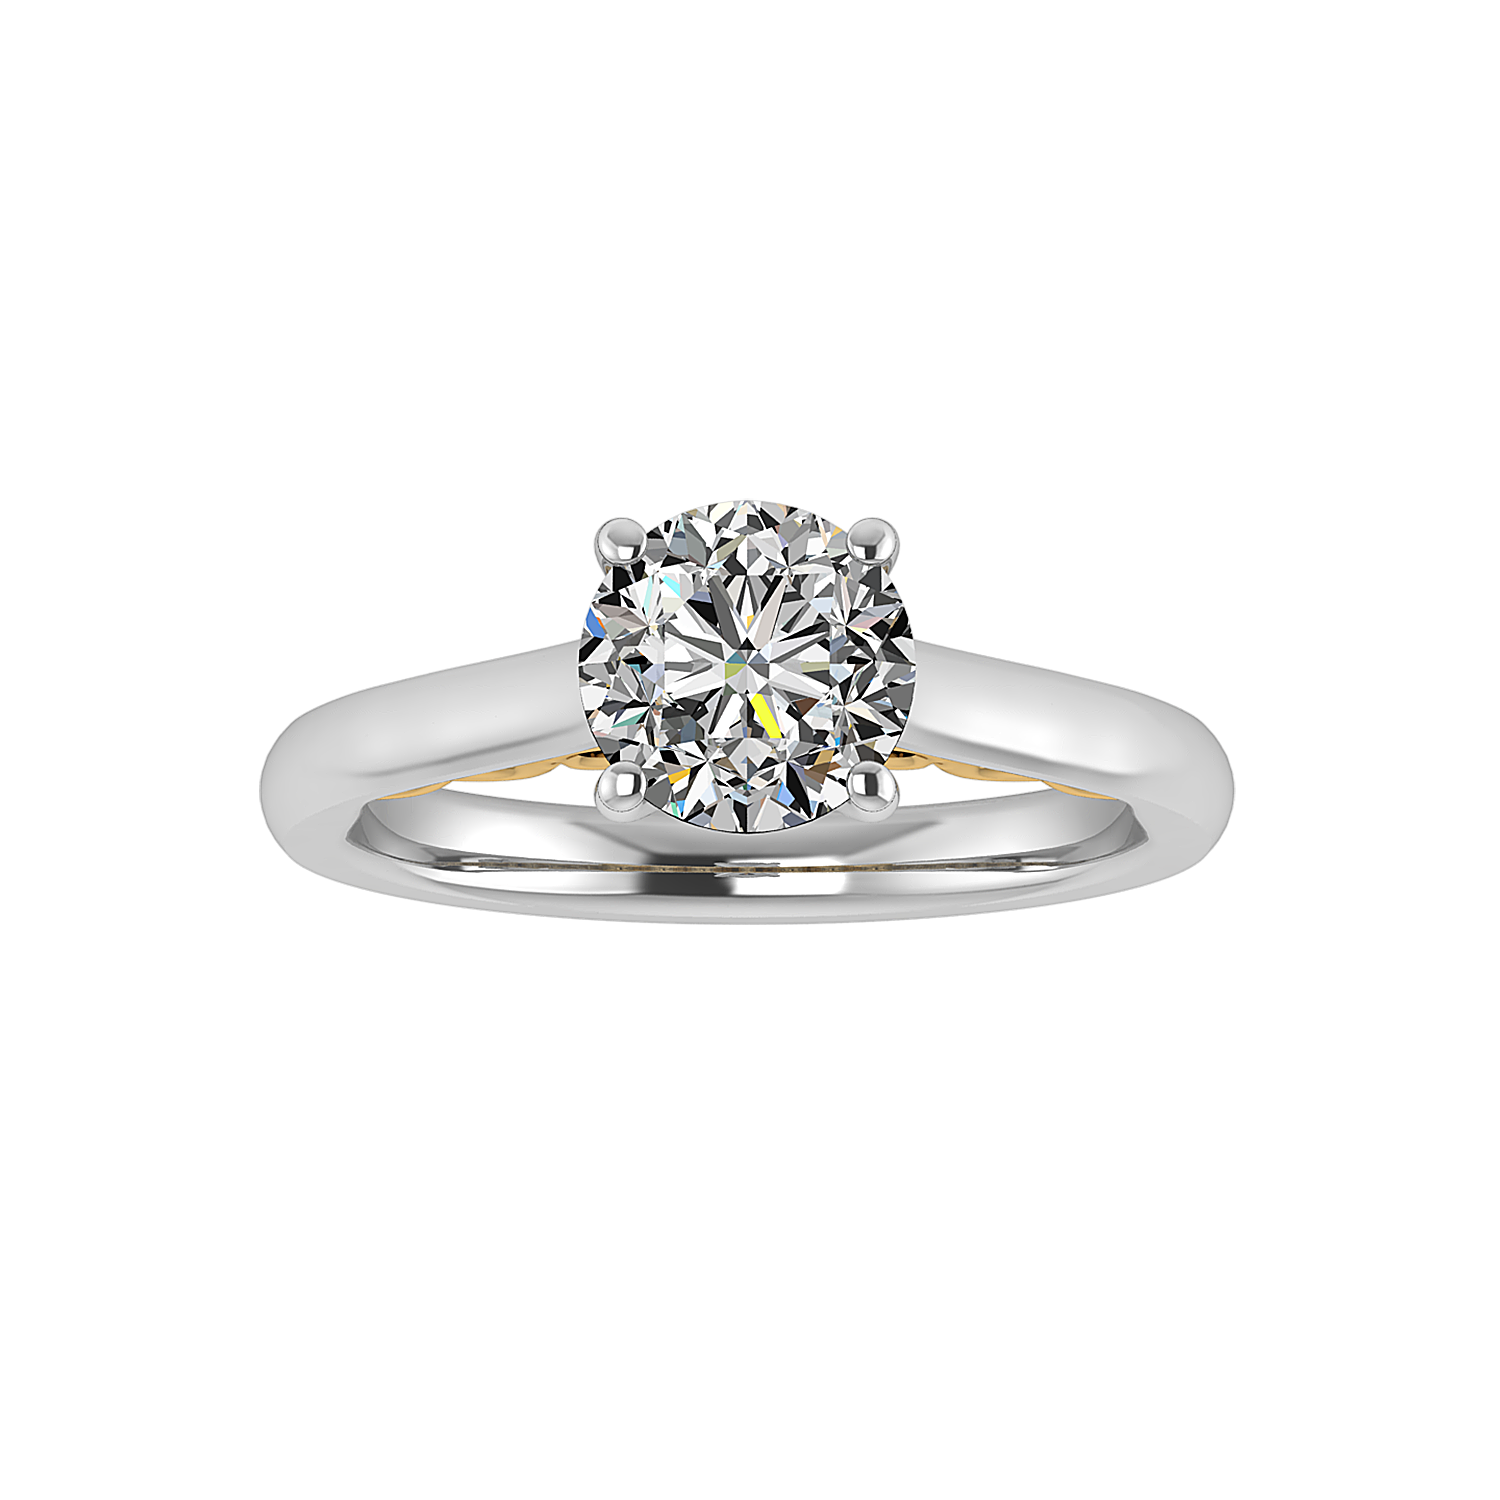 Hadley Filigree Solitaire Engagement Ring